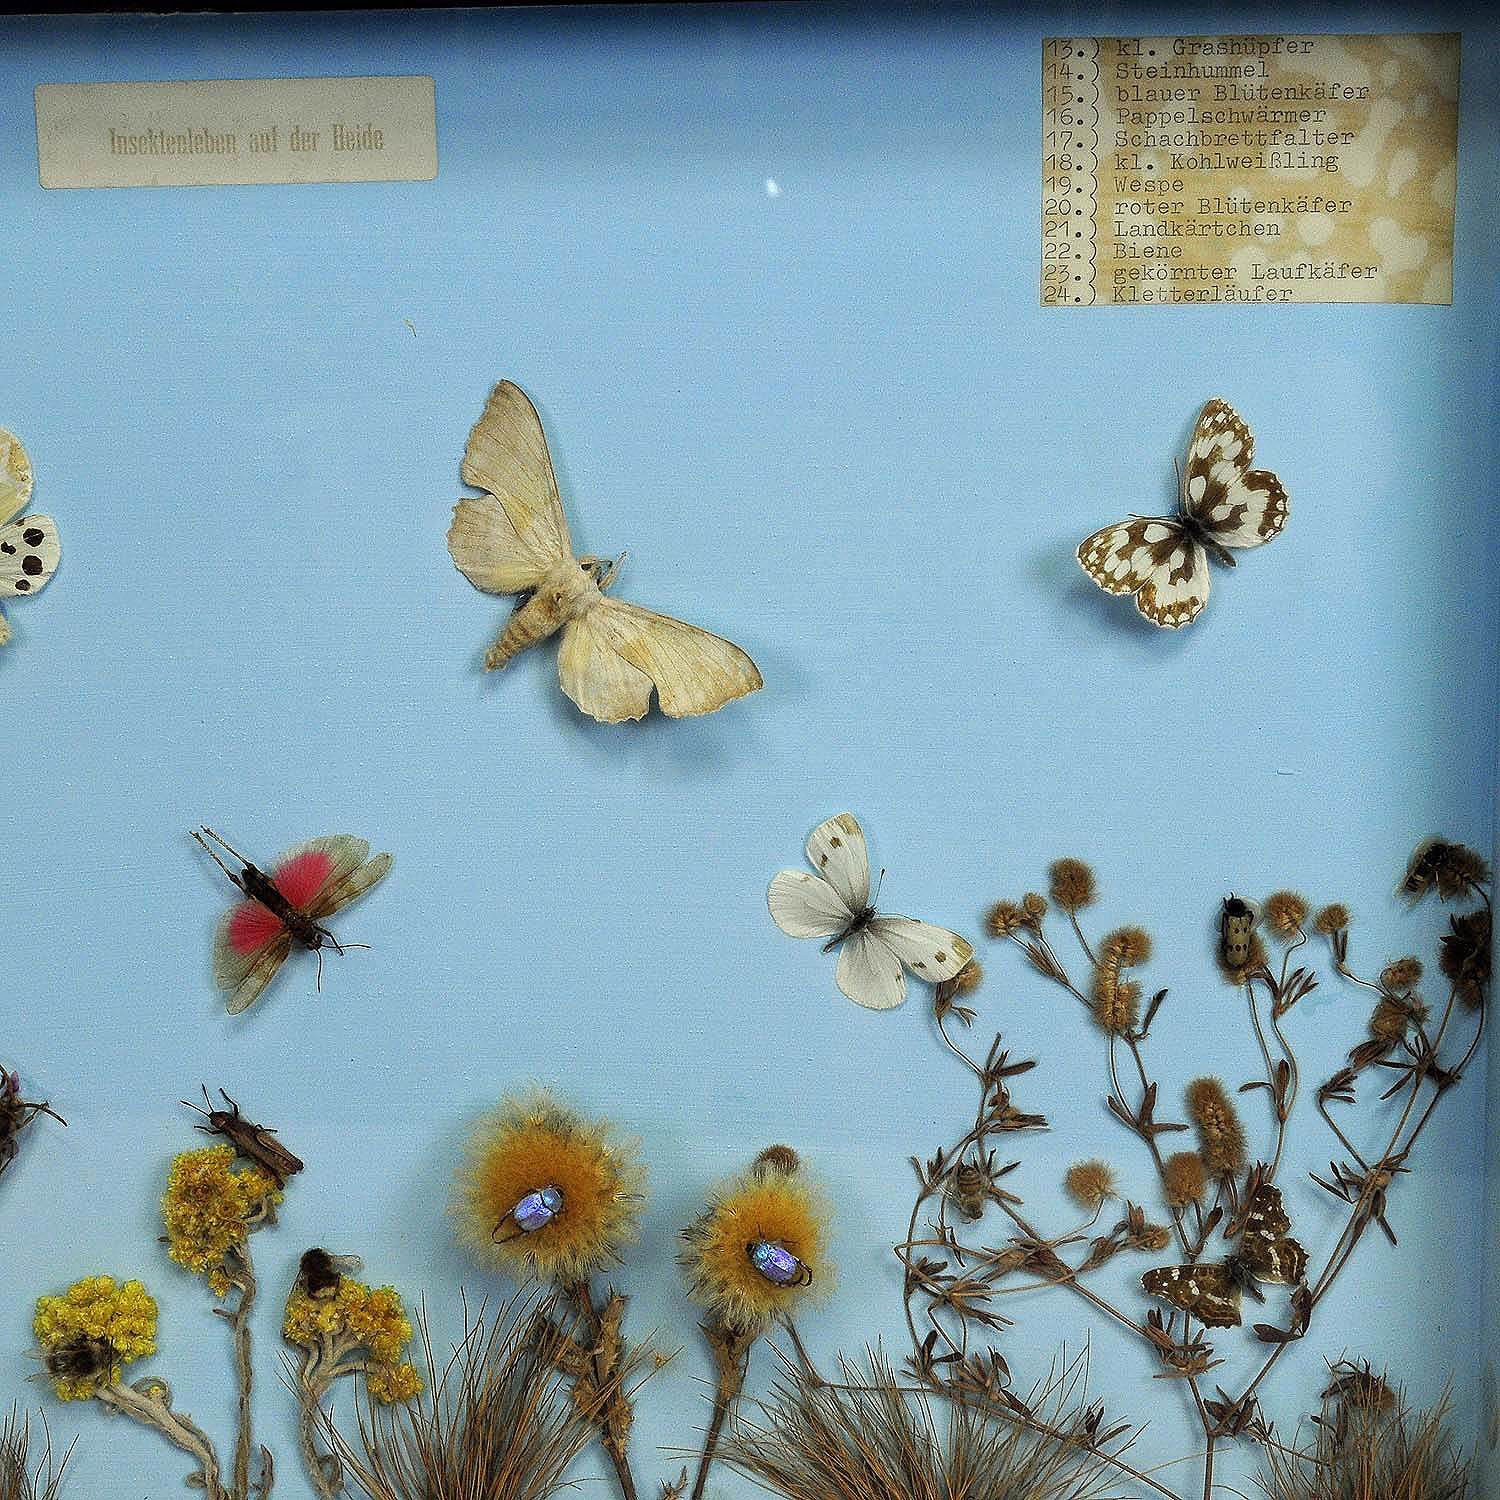 Great Vintage School Teaching Display of the Insects of the Heath